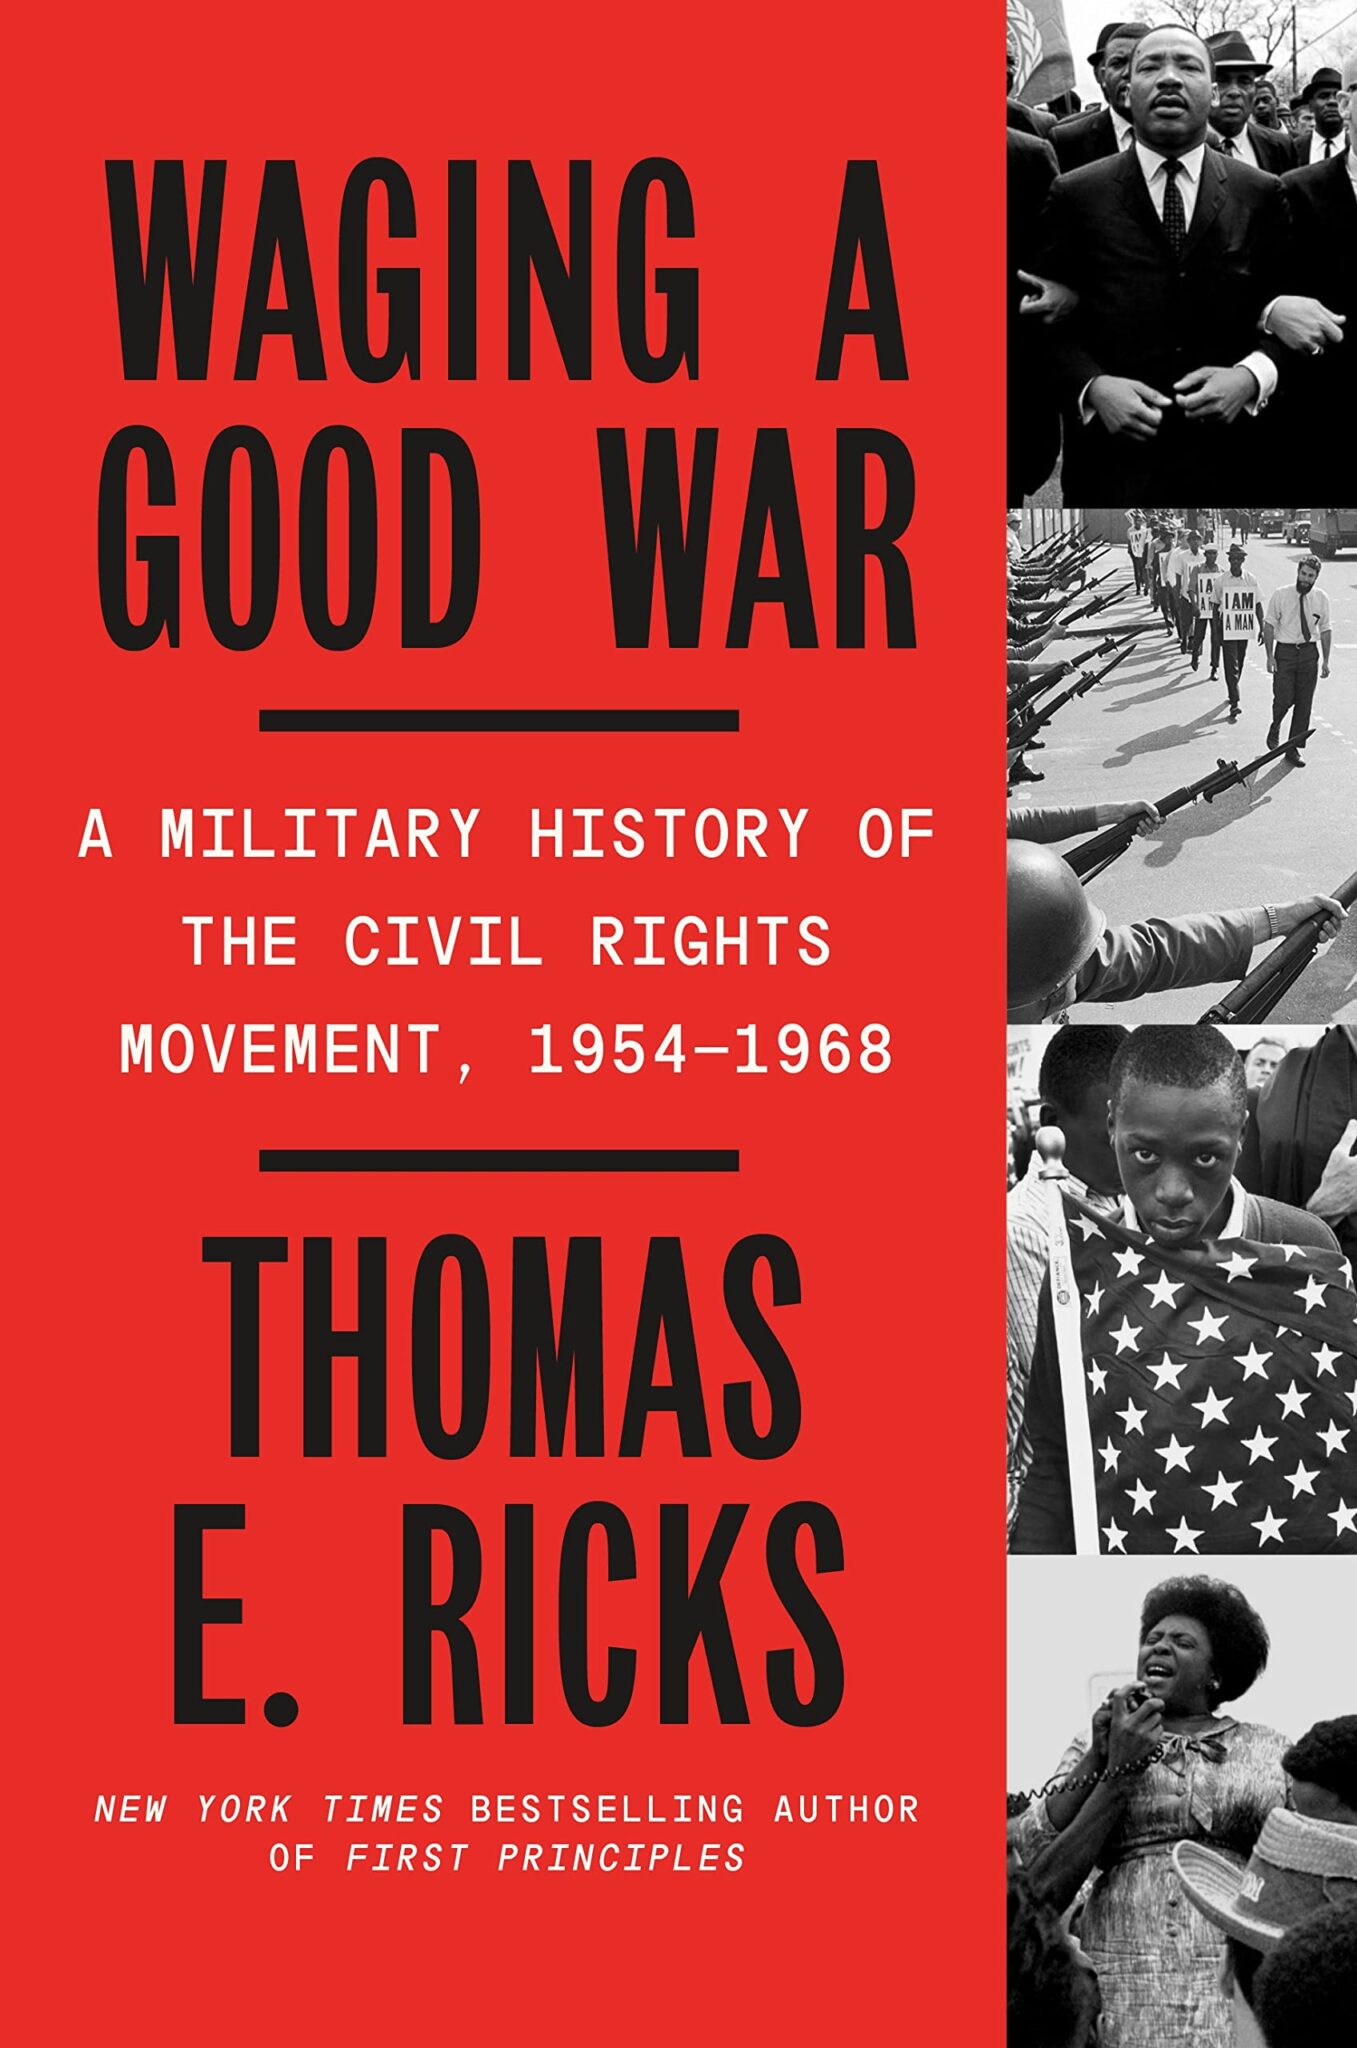 the-chris-voss-show-podcast-waging-a-good-war-a-military-history-of-the-civil-rights-movement